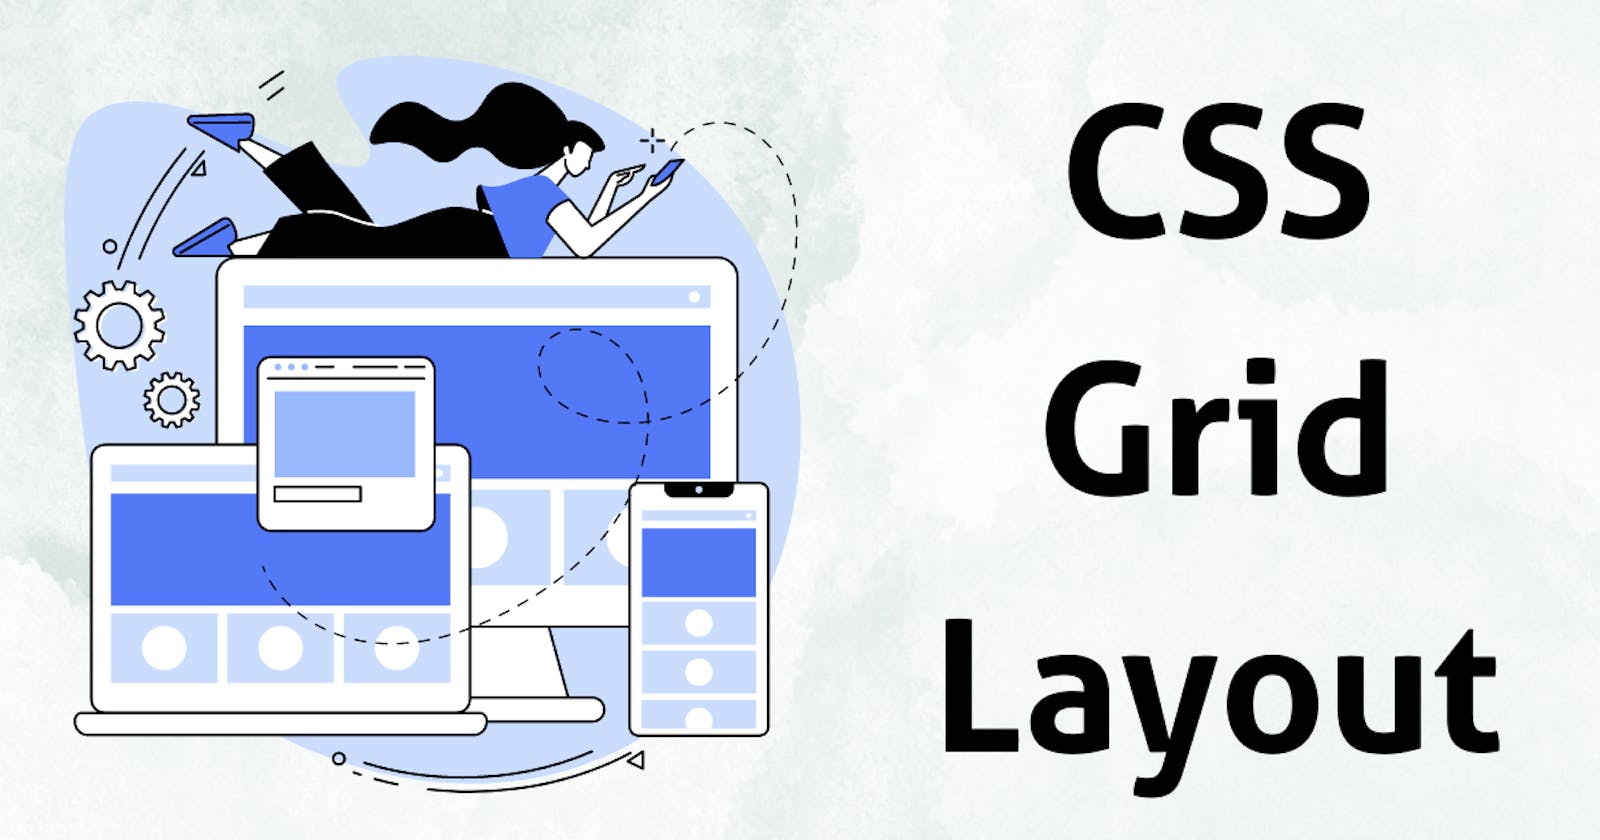 CSS Grid Layout: Building complex layouts with CSS Grid.